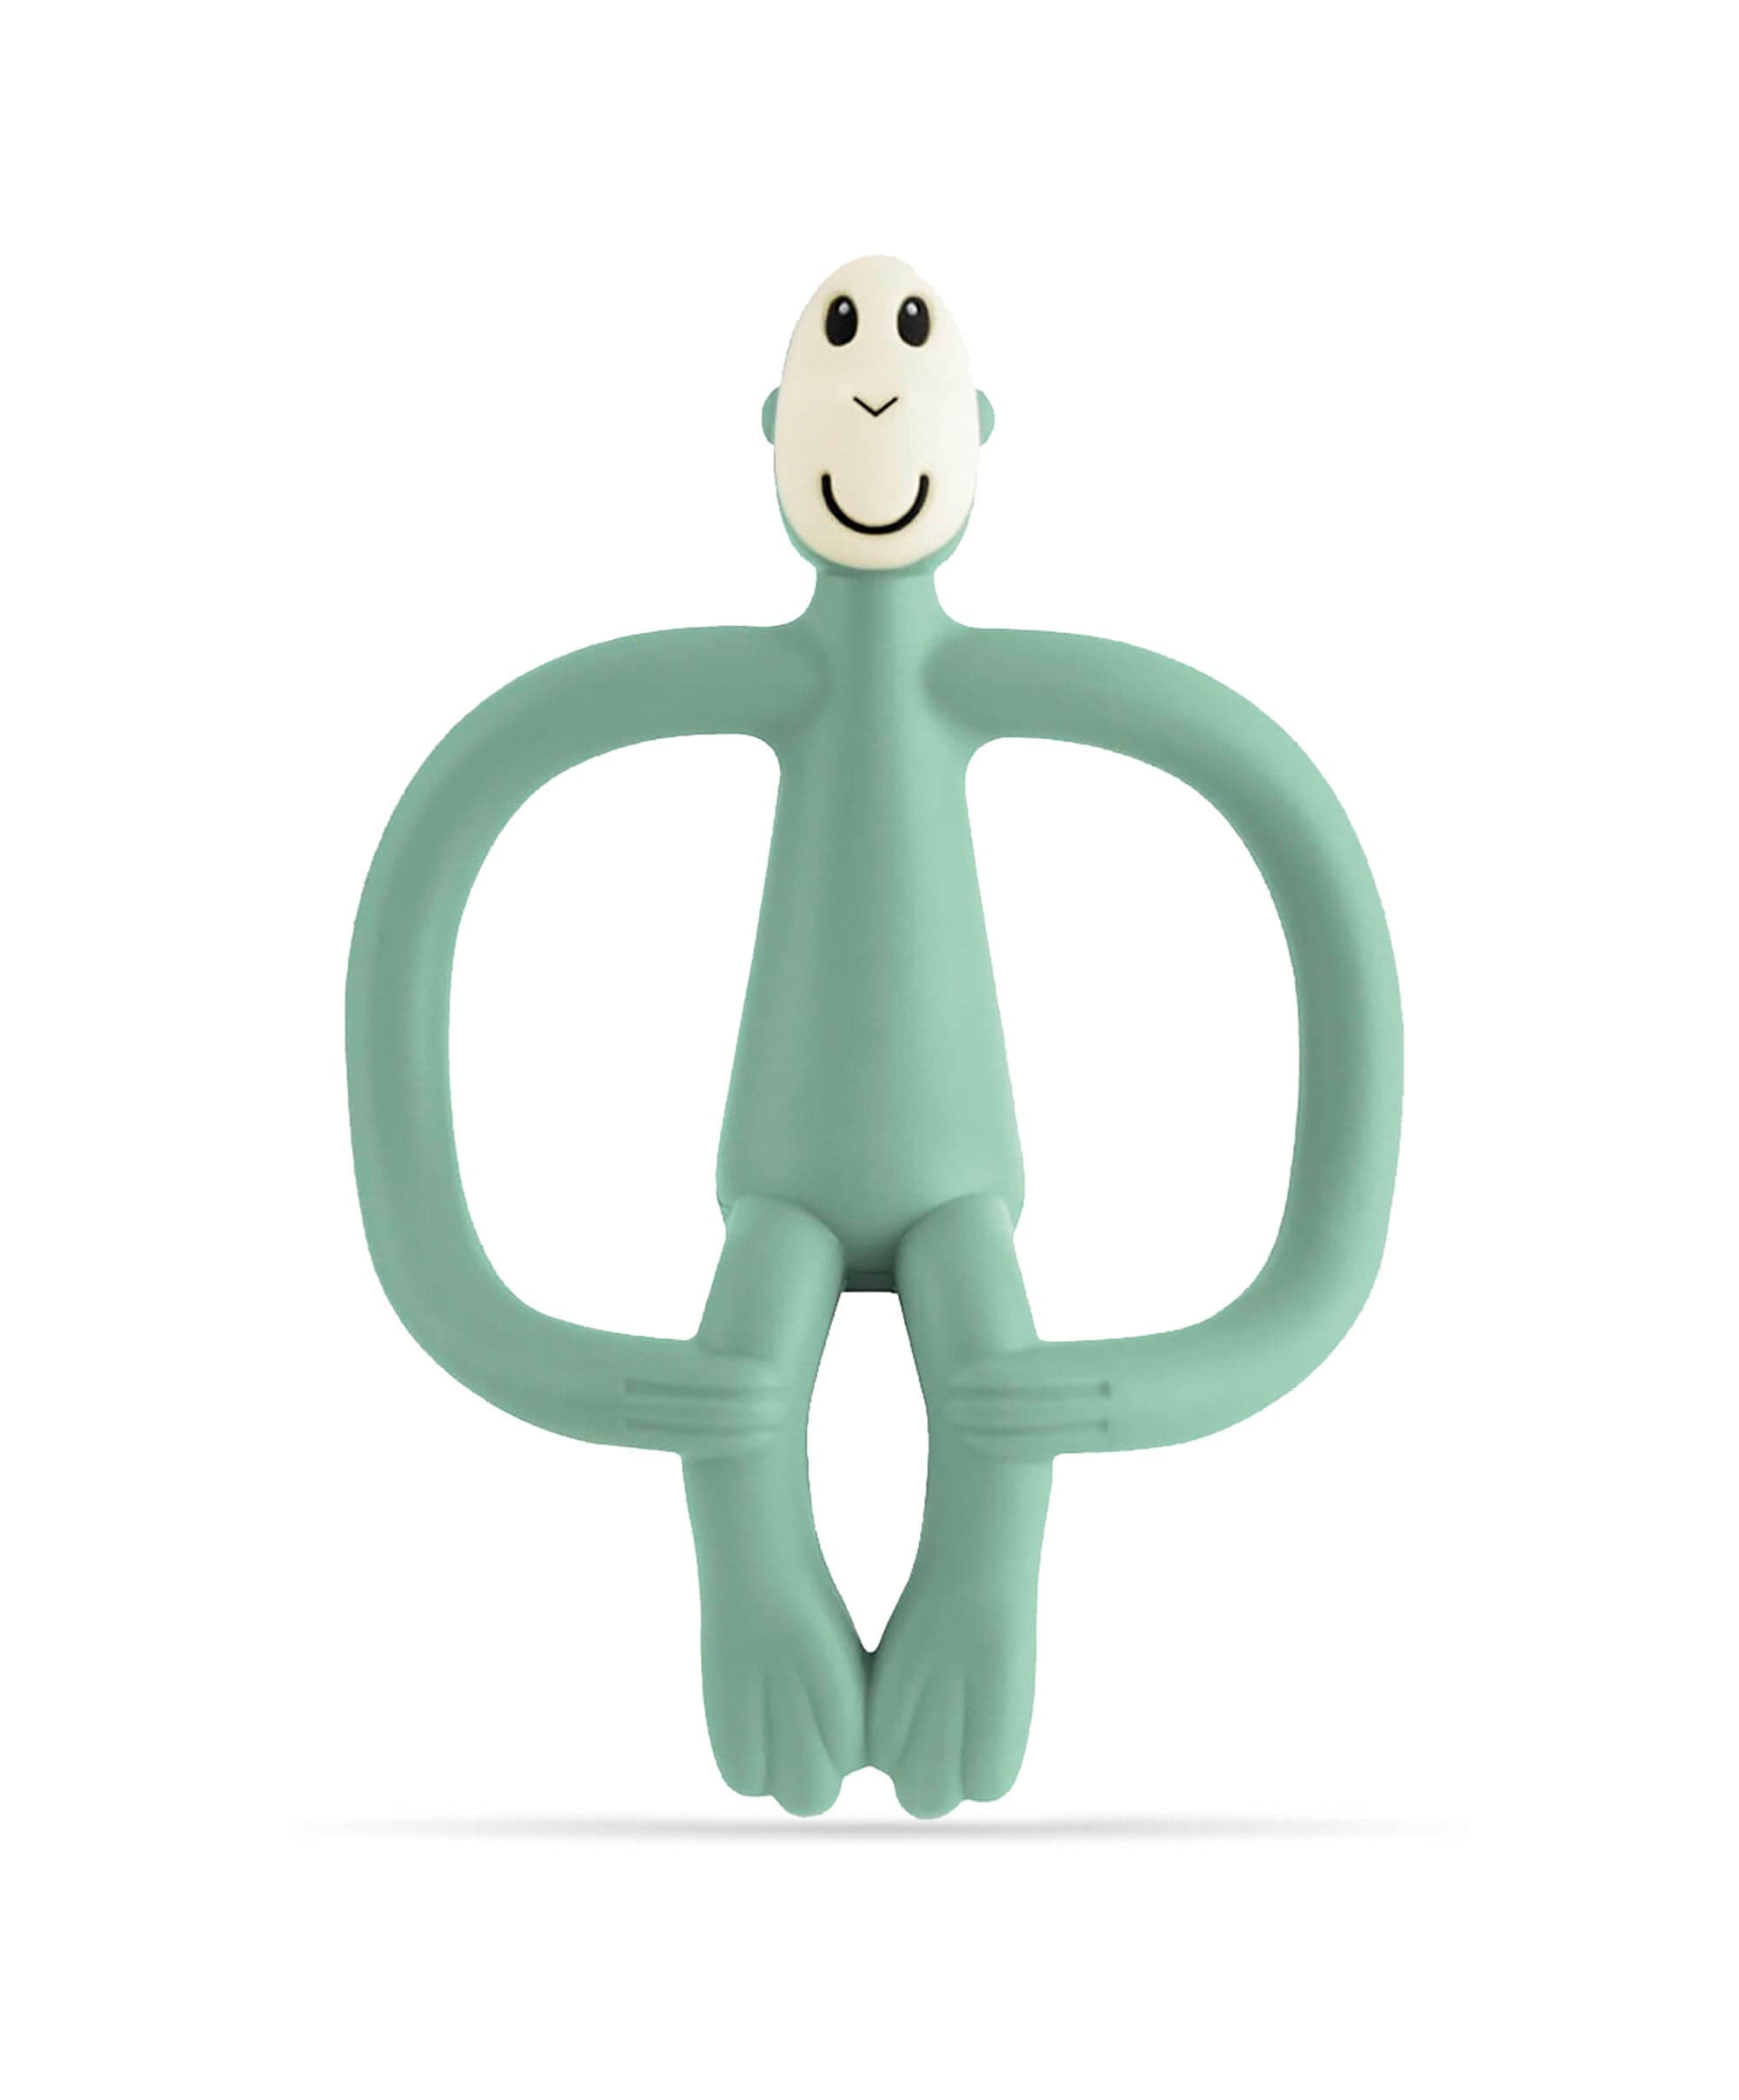 Matchstick Monkey Original Teething Toy in Mint Green